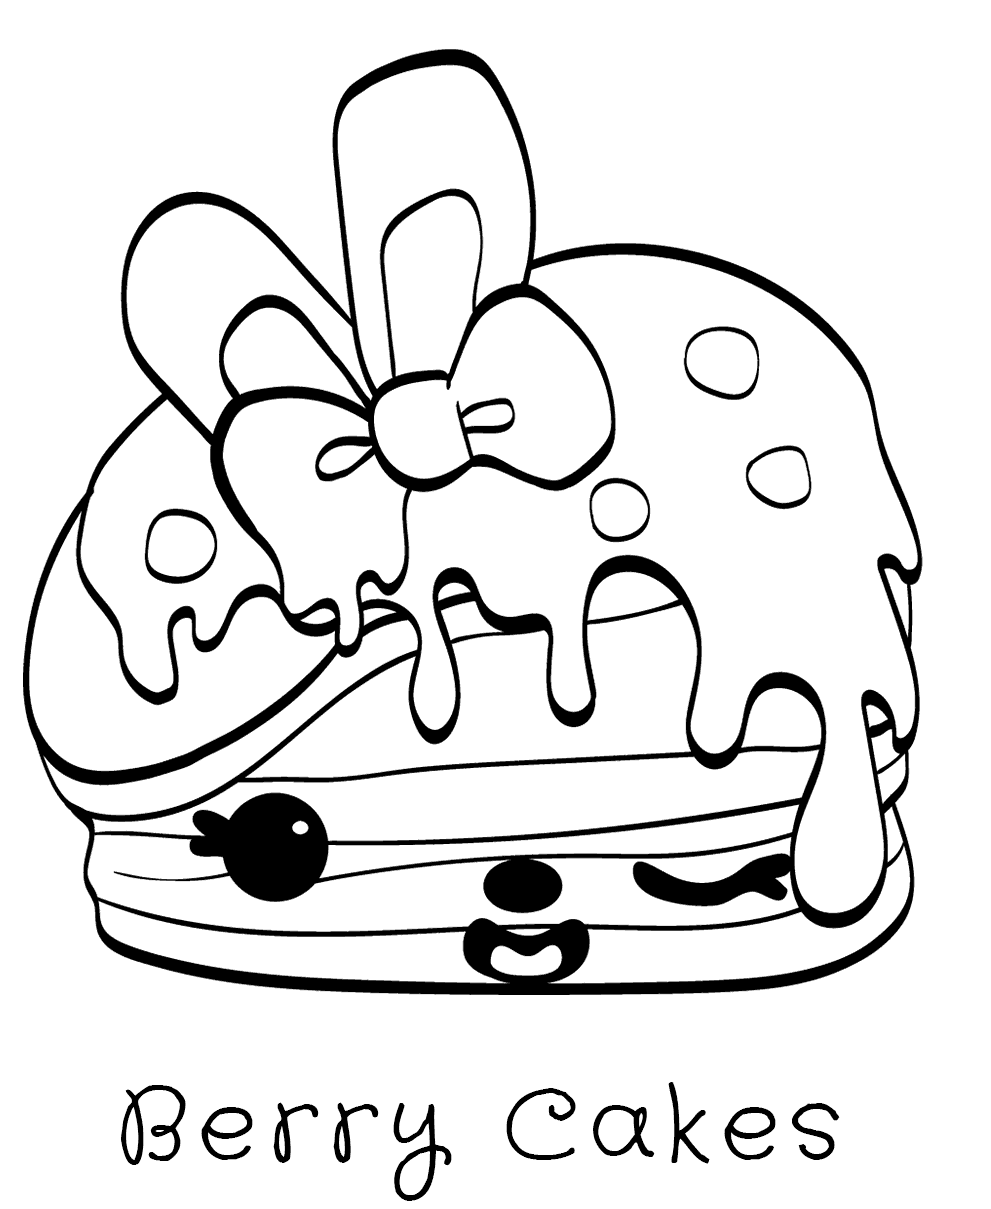 Berry Cakes Coloring Pages